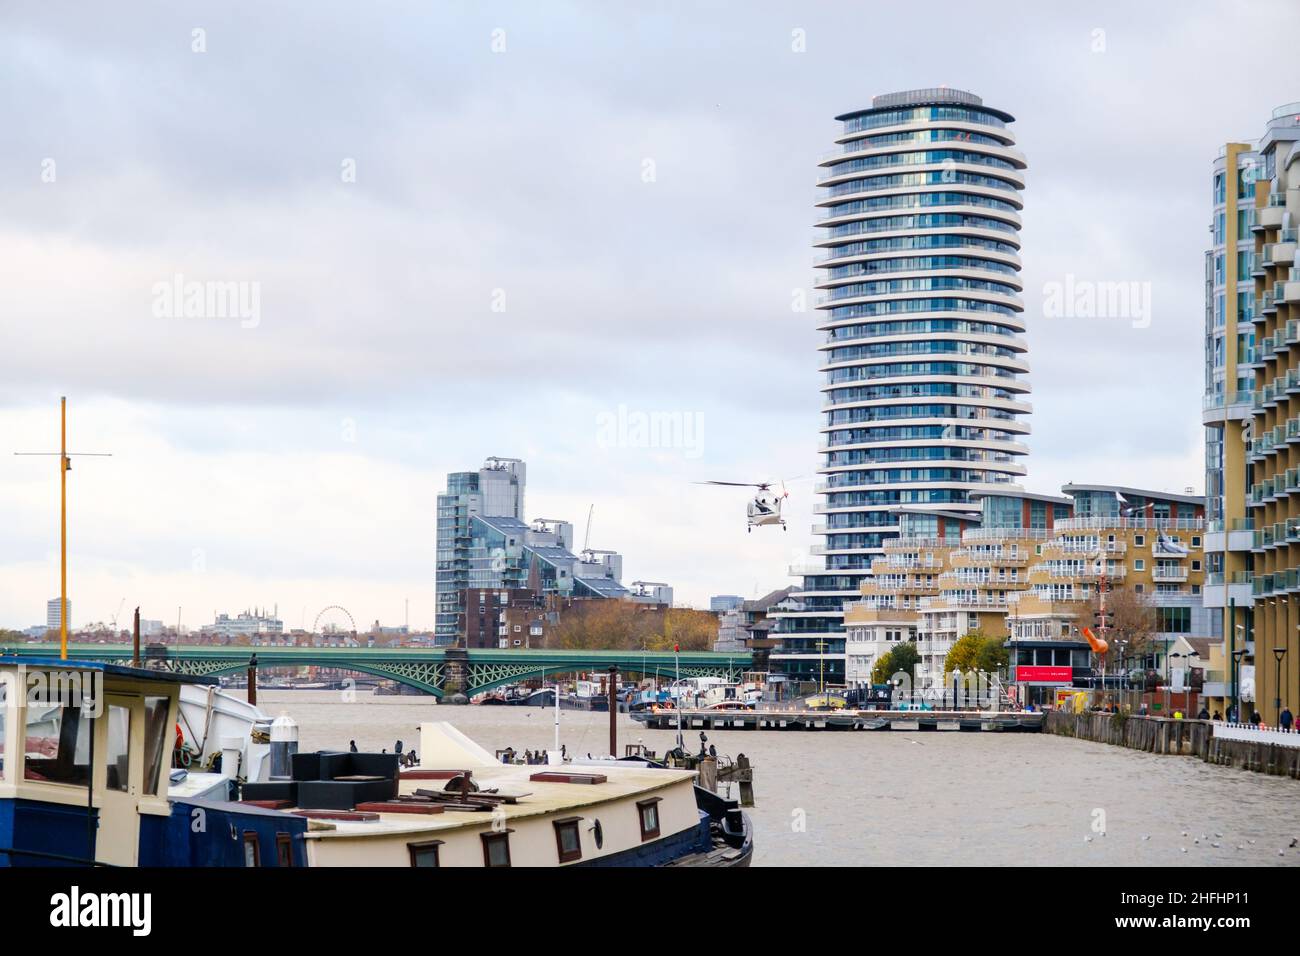 A helicopter takes off from Battersea Heliport in London Stock Photo